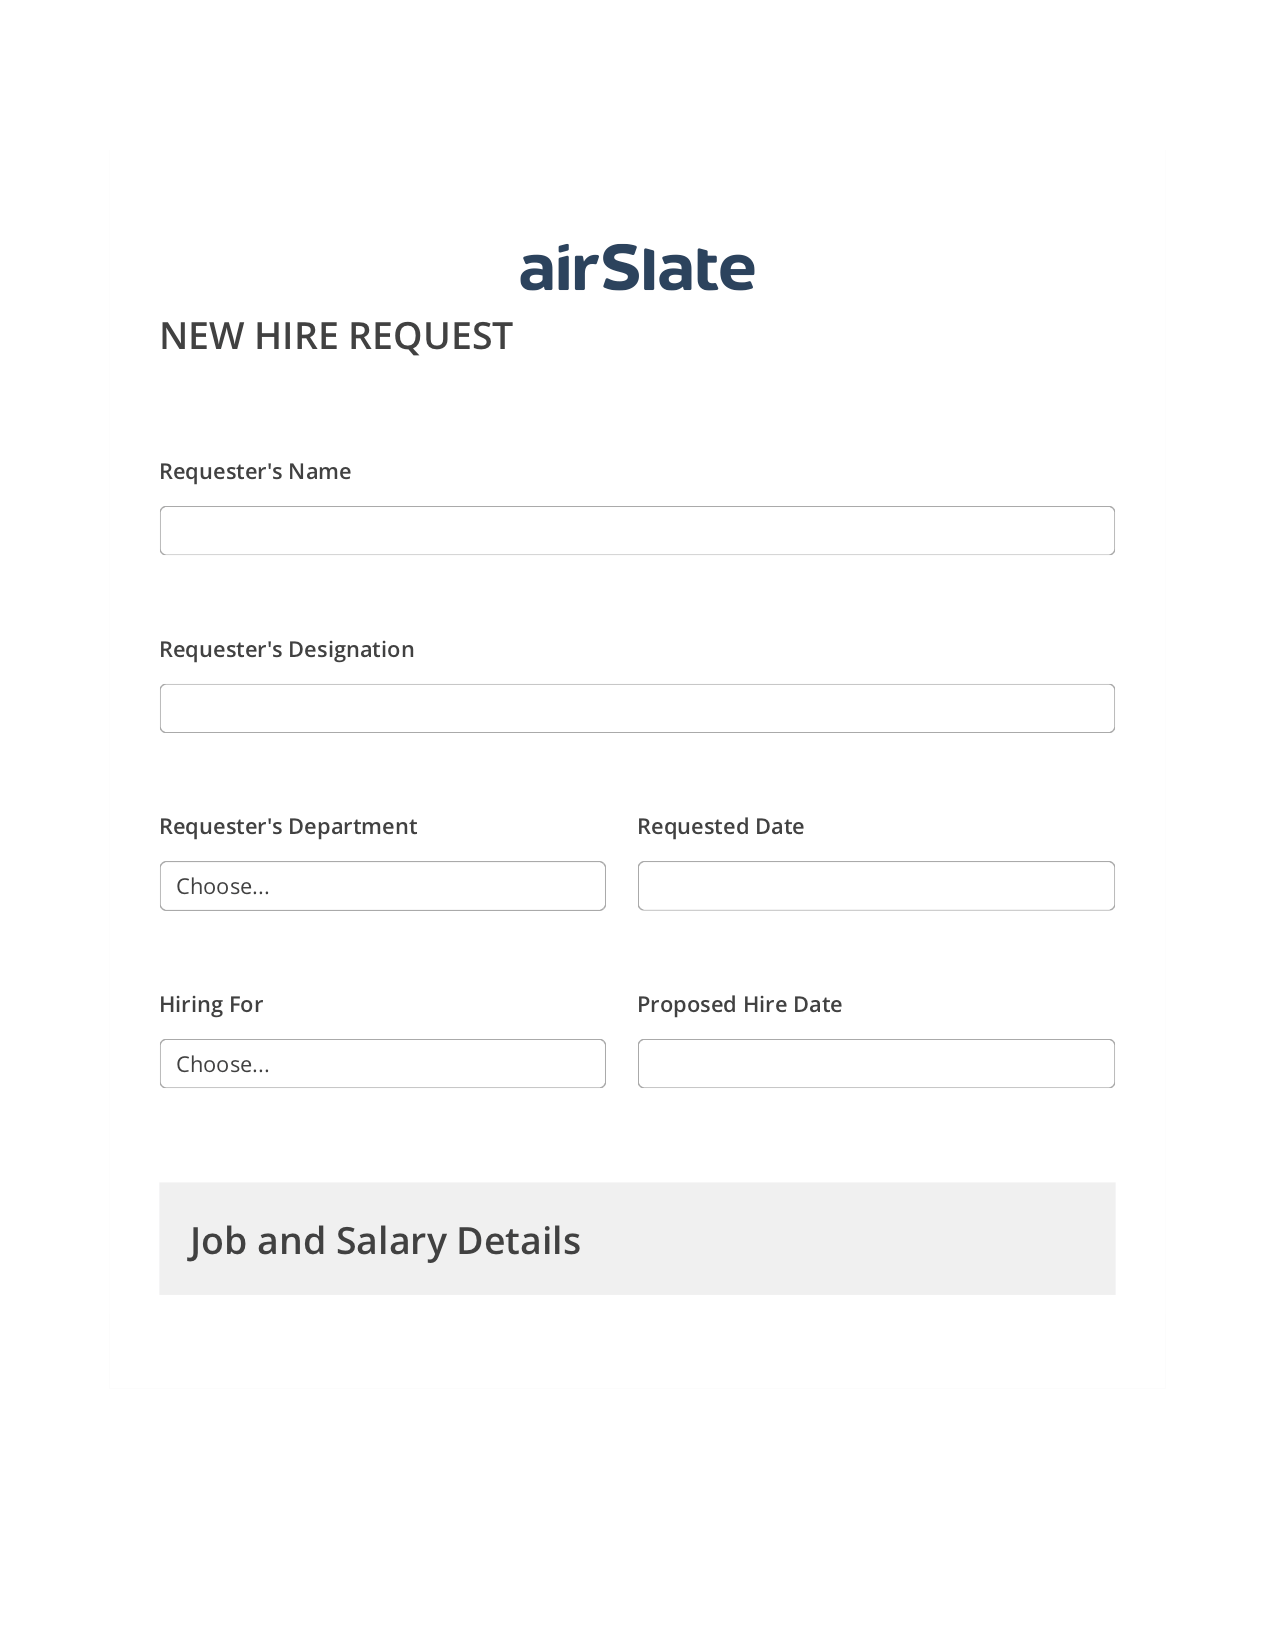 Hiring Request Workflow Prefill from NetSuite records, Lock the Slate Bot, Export to Google Sheet Bot